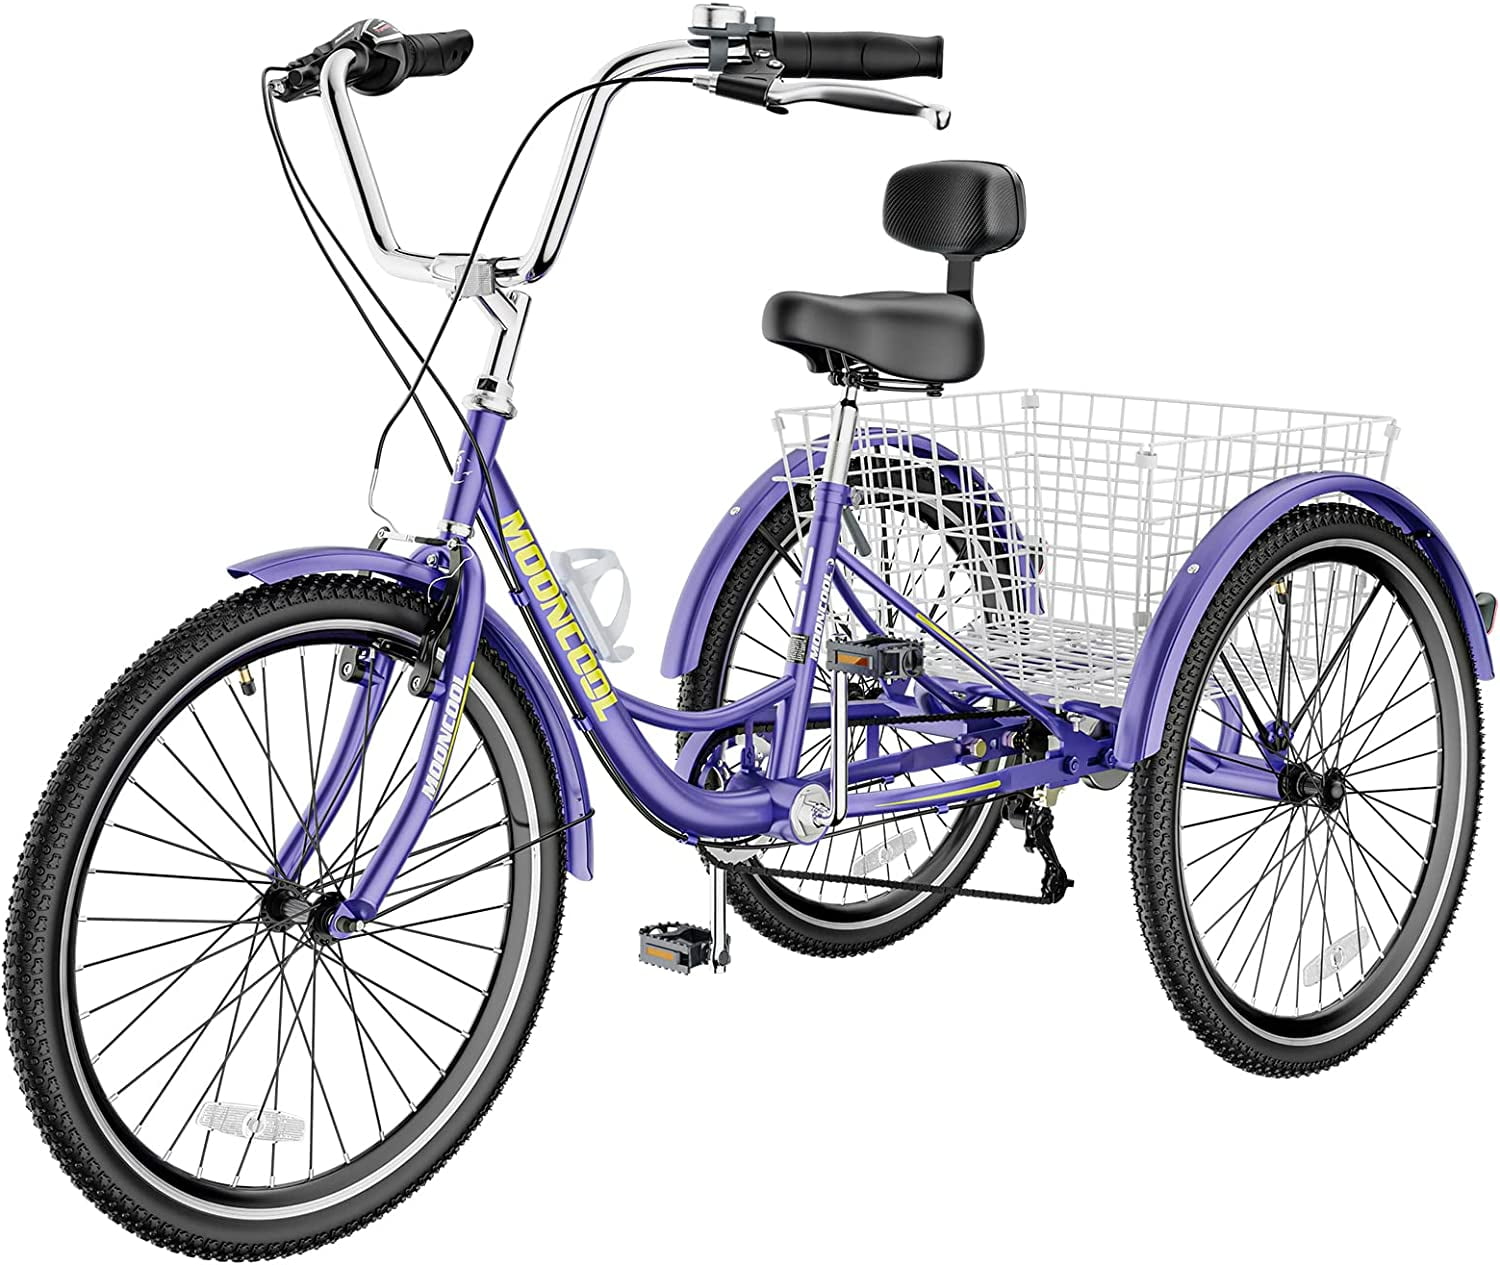 Mooncool Adult Tricycle 20/24/26 inch 7 Speed, Three Wheel Bicycle for Adult, Trike Cruiser W/ Tools & Big Basket for Exercise Shopping Picnic Outdoor Activities